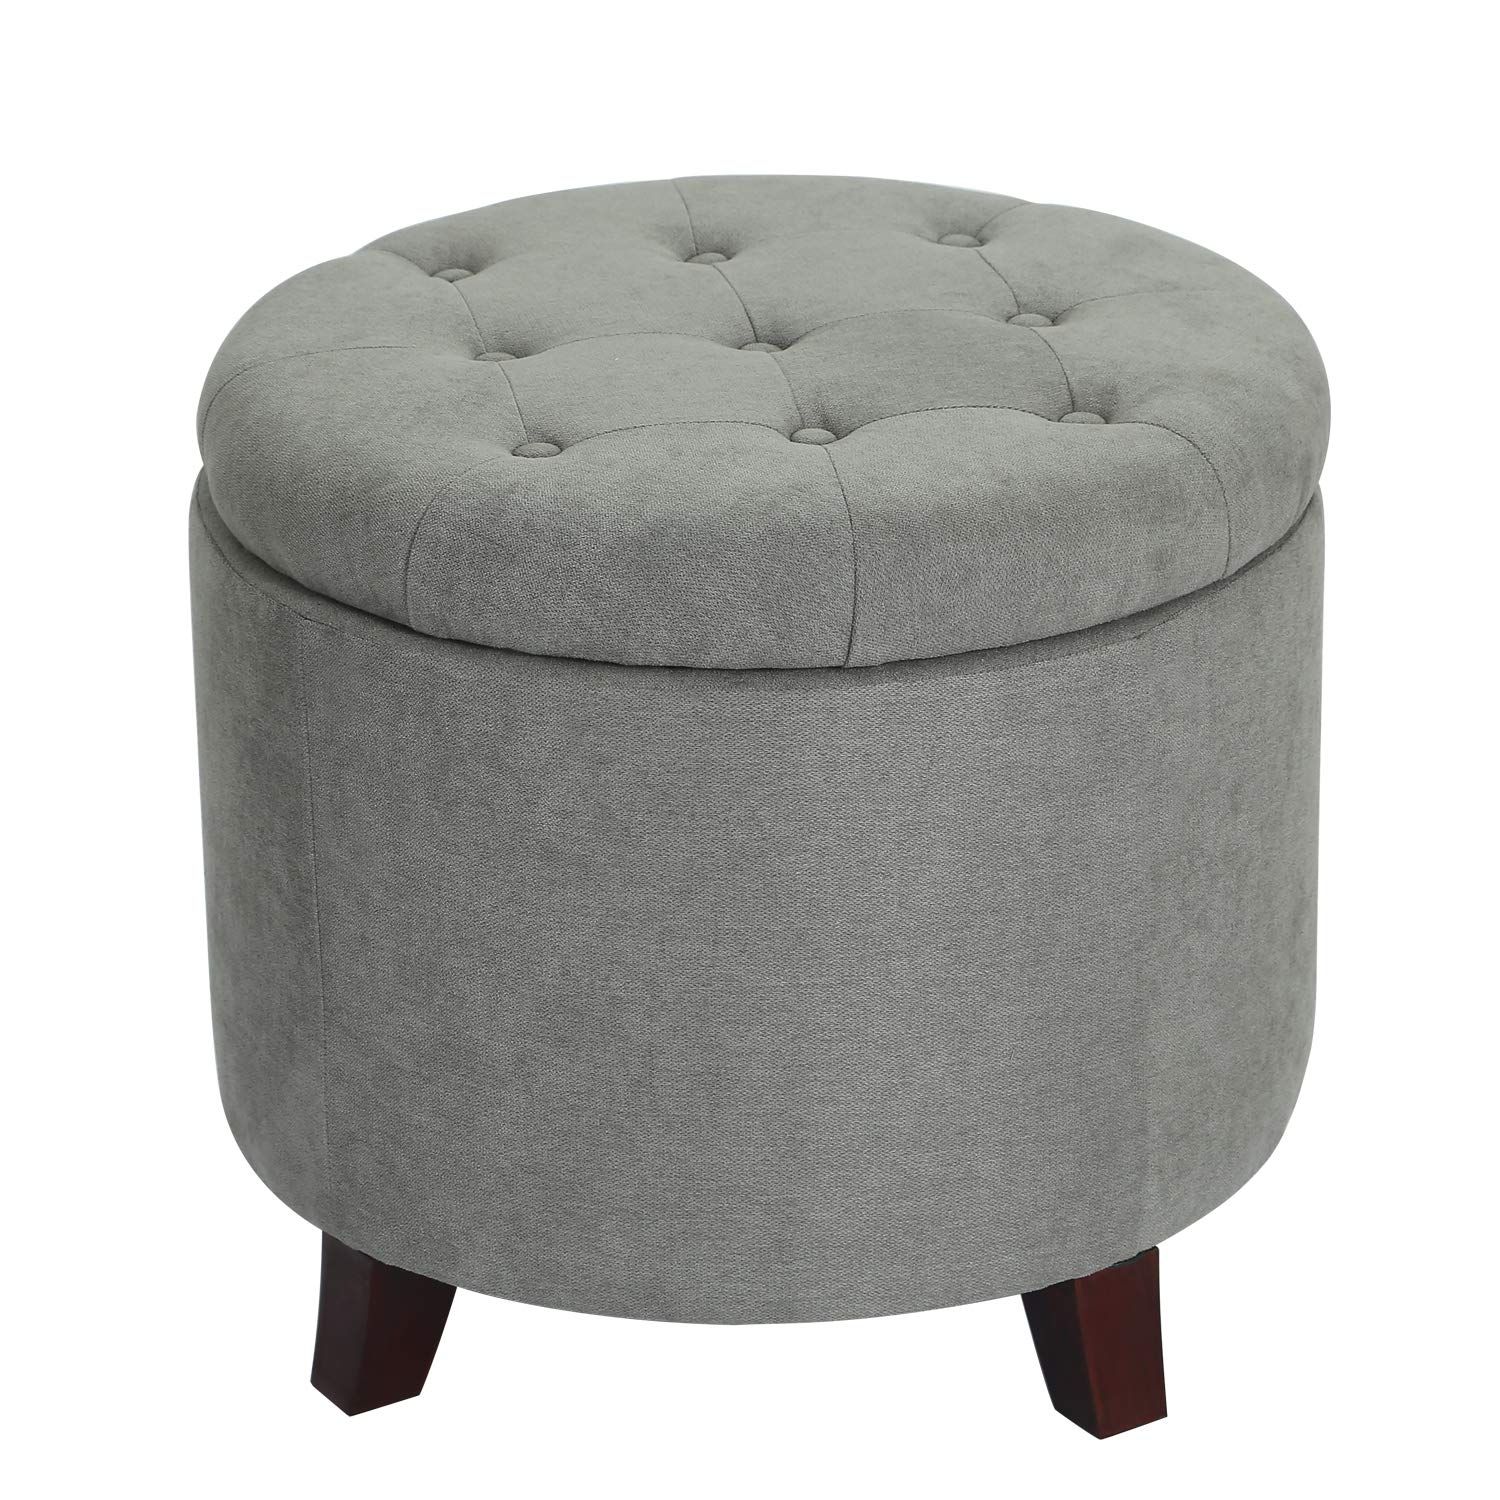 Adeco Fabric Cushion Round Button Tufted Lift Top Storage Ottoman Pertaining To Charcoal Fabric Tufted Storage Ottomans (View 8 of 20)